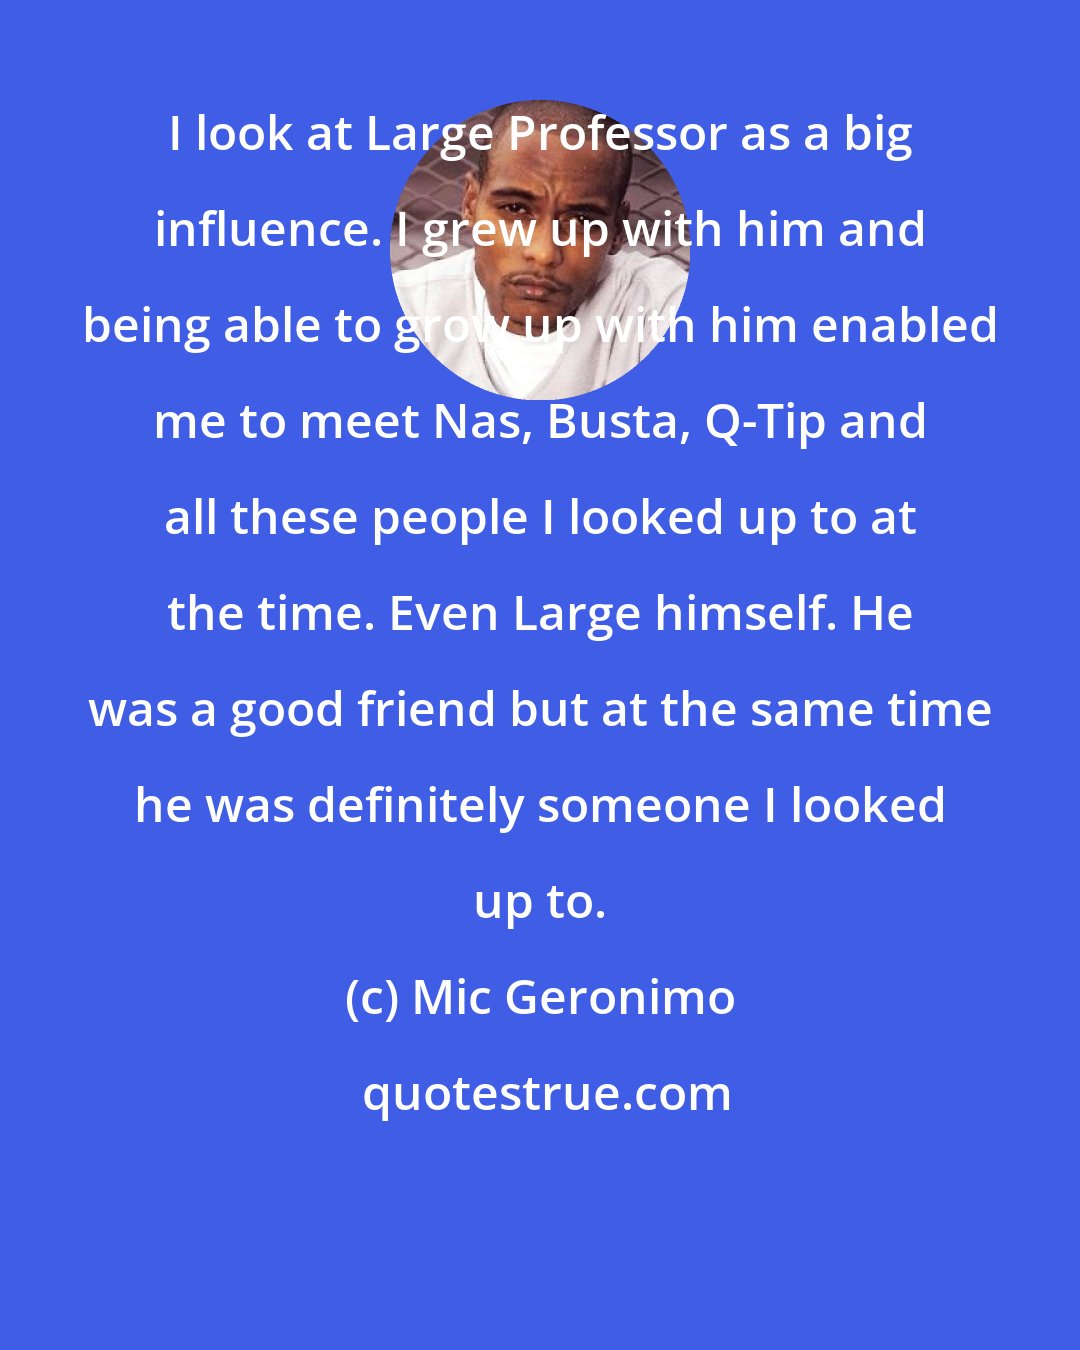 Mic Geronimo: I look at Large Professor as a big influence. I grew up with him and being able to grow up with him enabled me to meet Nas, Busta, Q-Tip and all these people I looked up to at the time. Even Large himself. He was a good friend but at the same time he was definitely someone I looked up to.